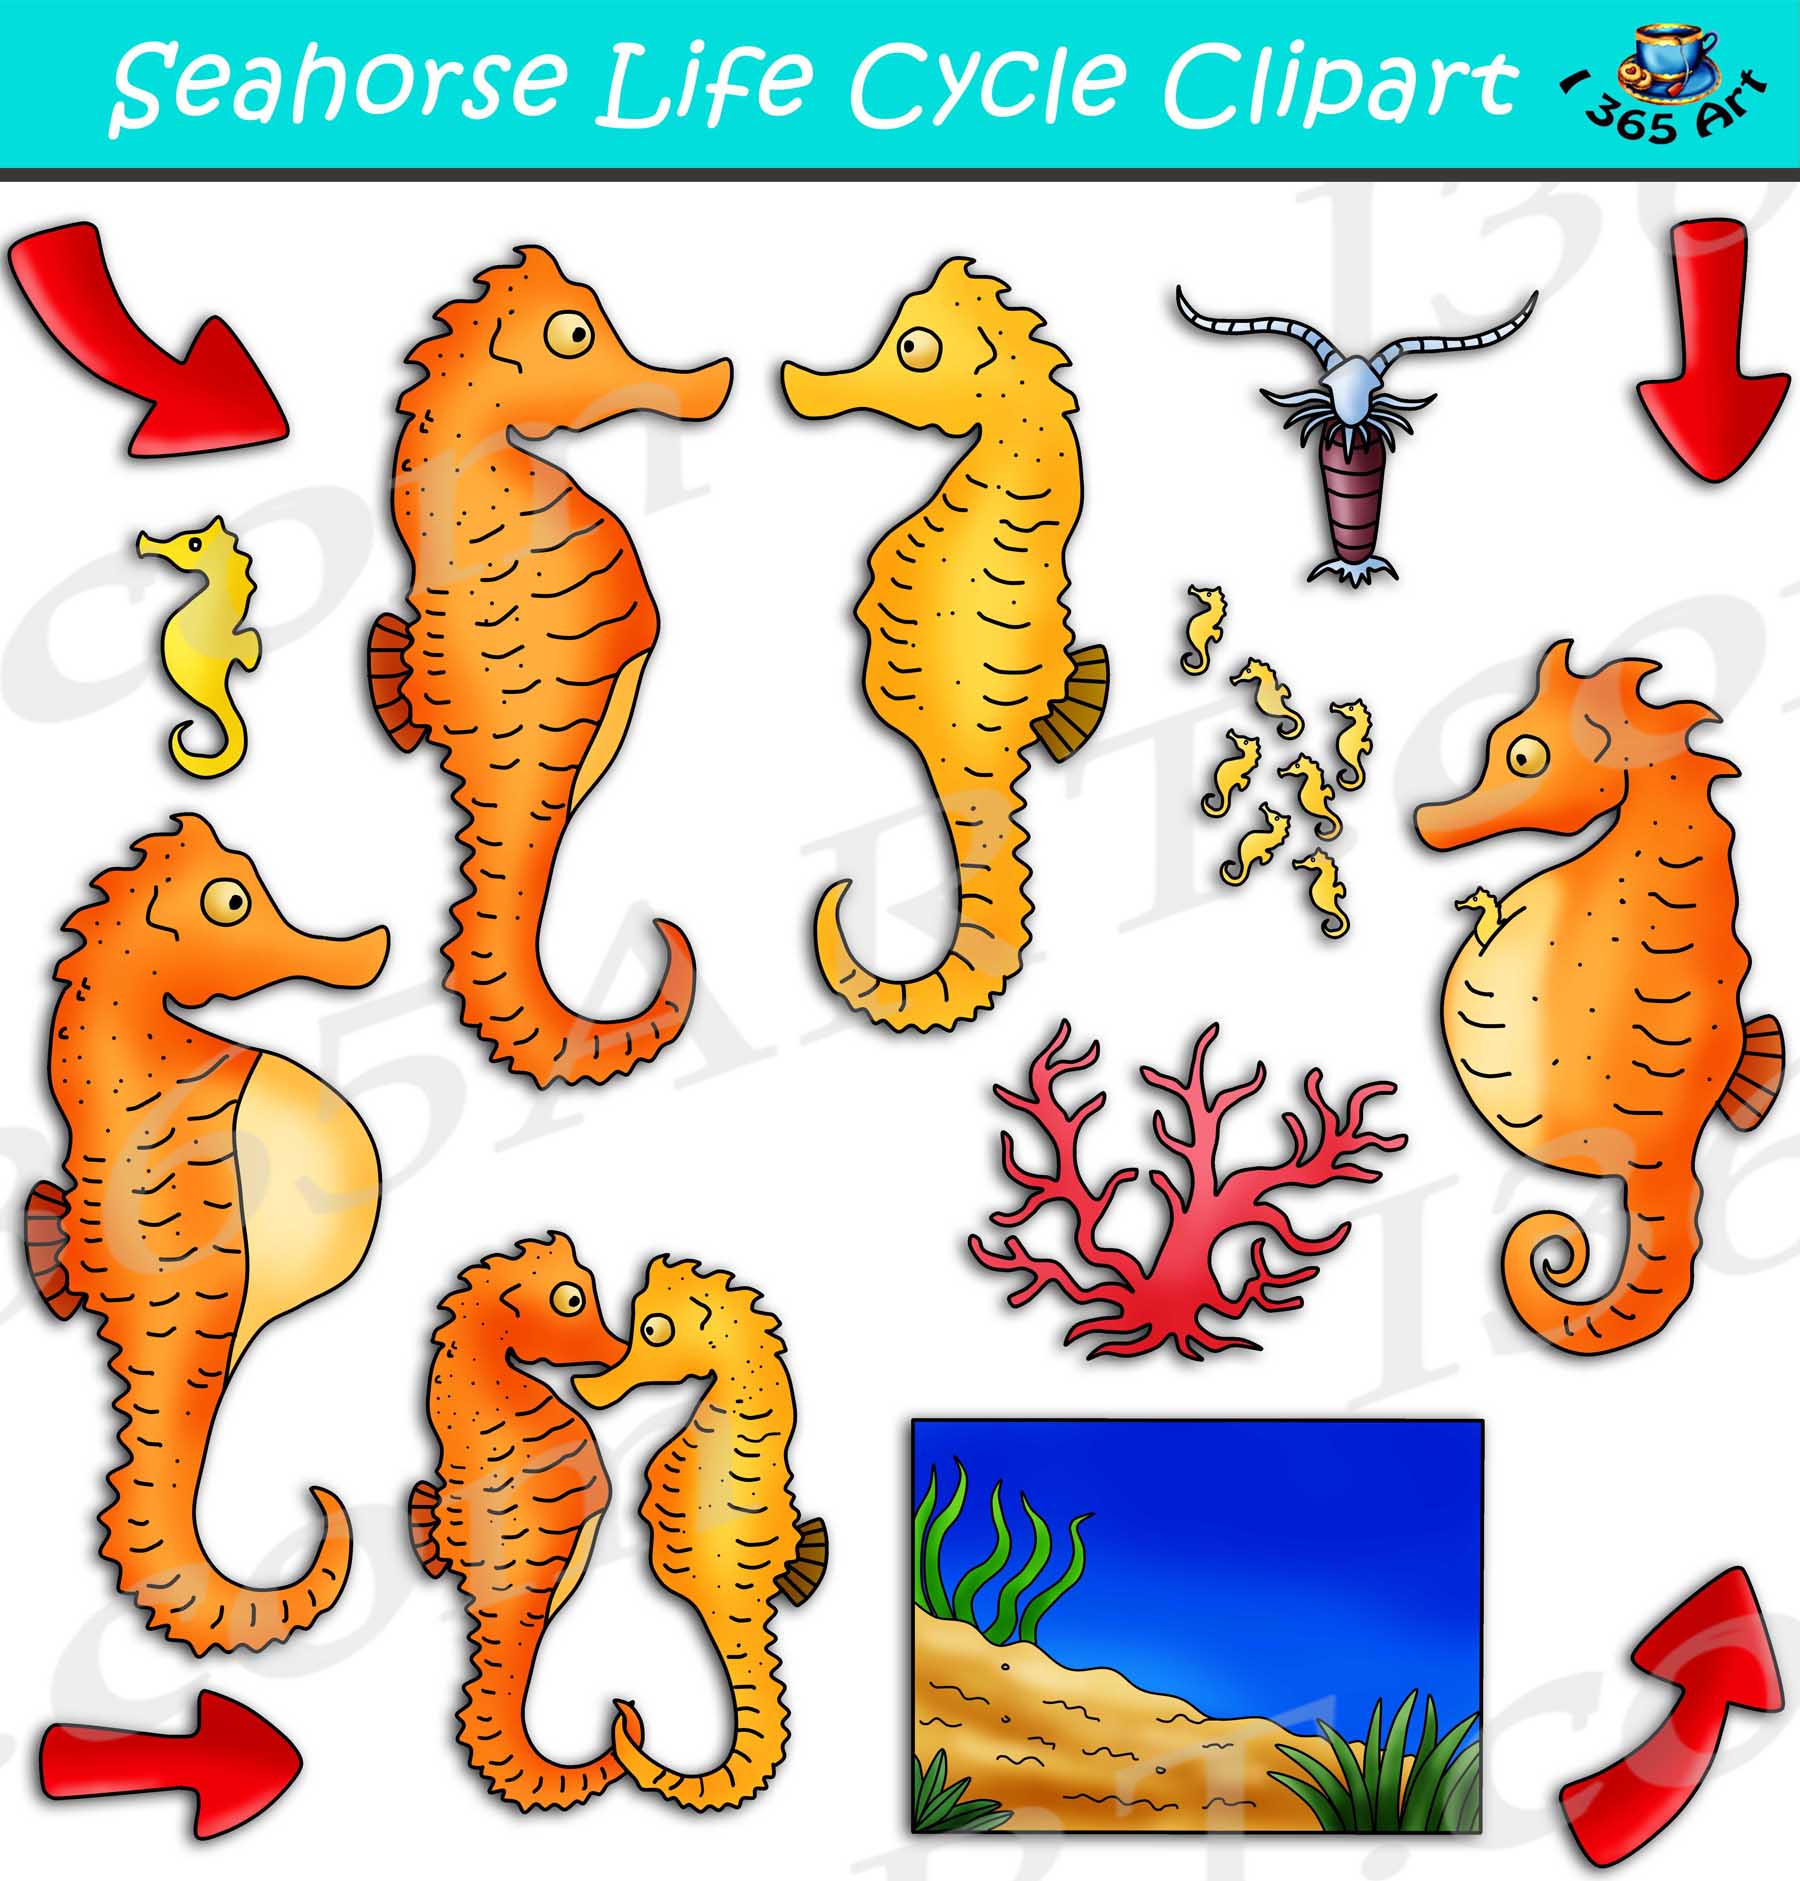 Seahorse Life Cycle Clipart Set Download - Clipart 4 School